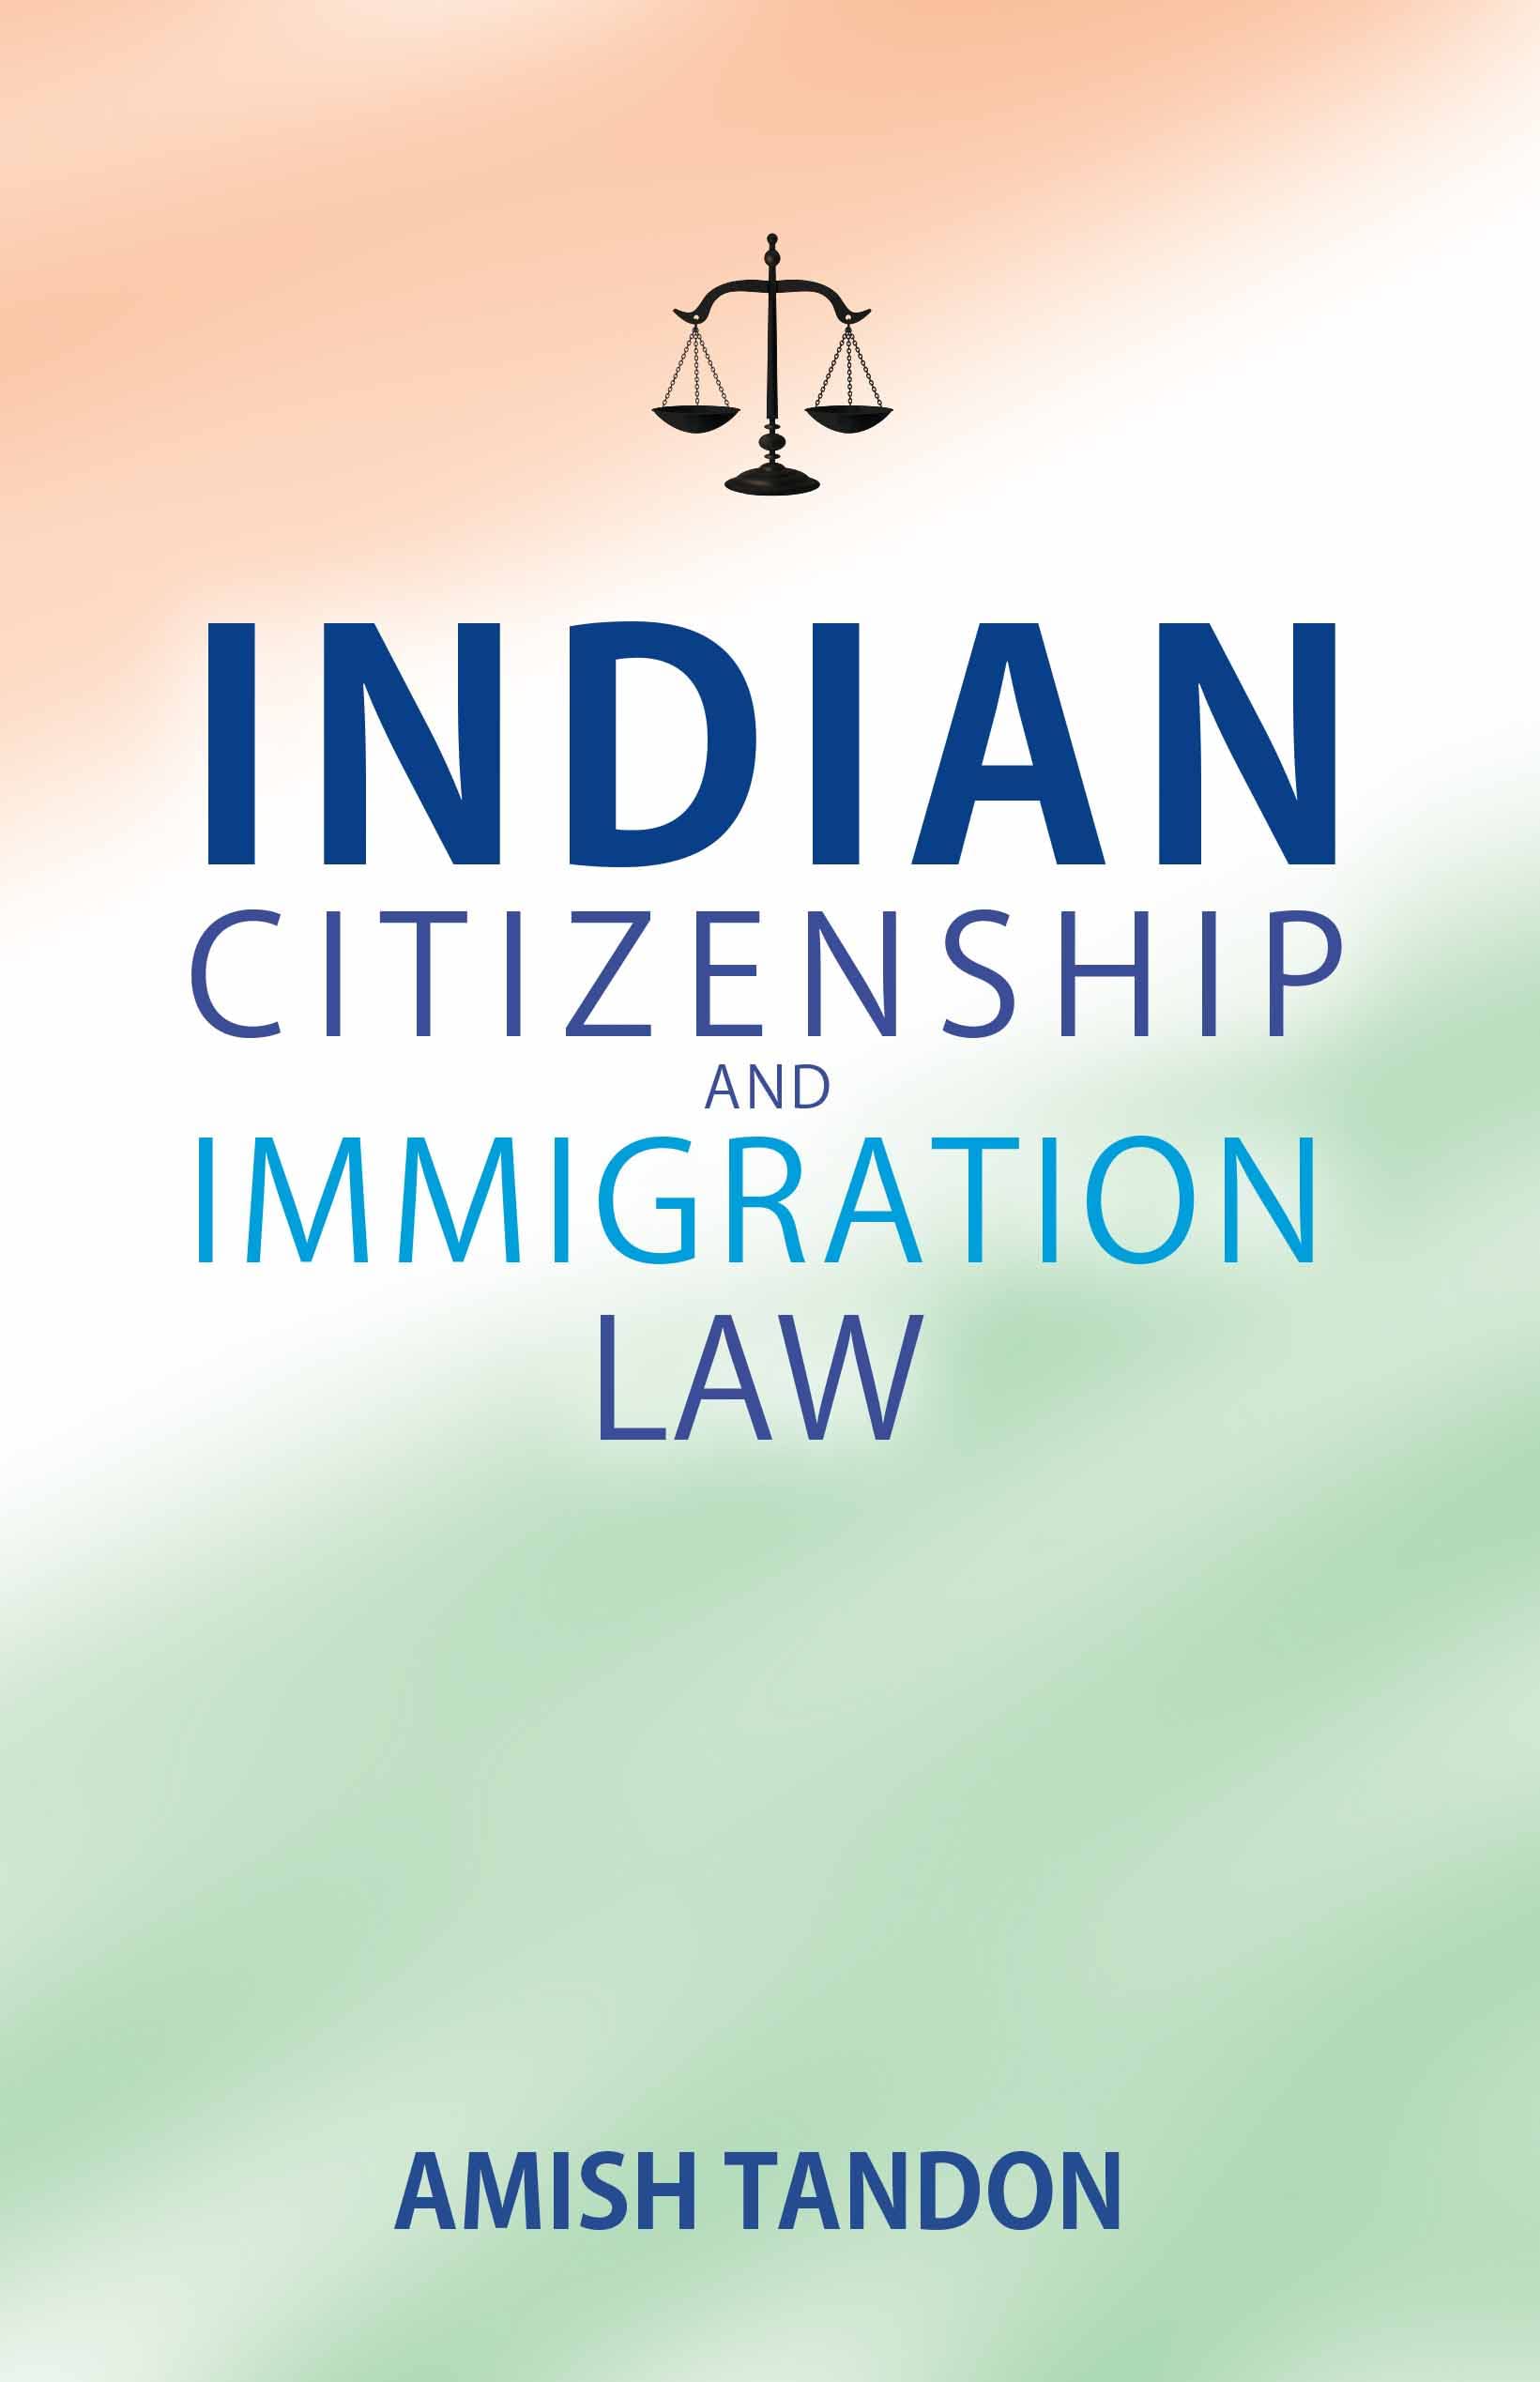 Indian Citizenship & Immigration law by Amish Tandon